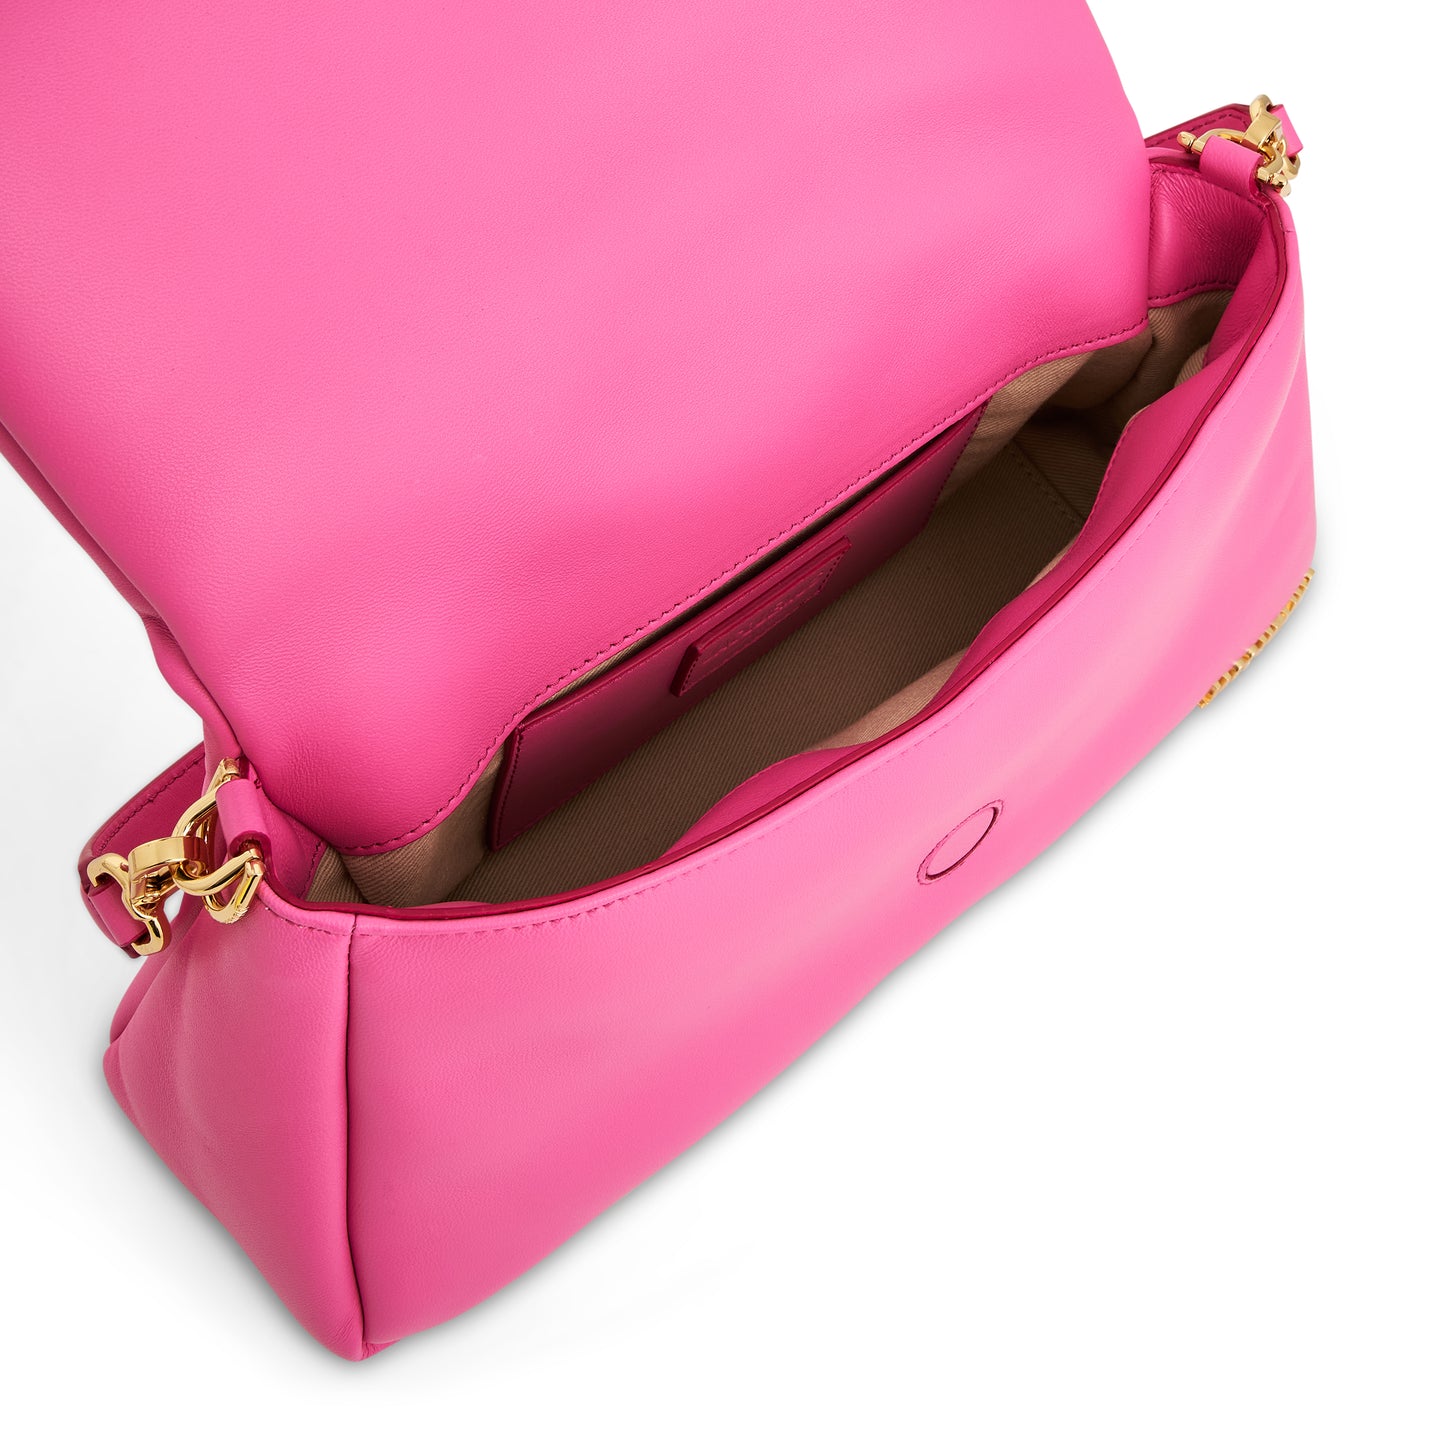 Le Bambimou Leather Bag in Neon Pink